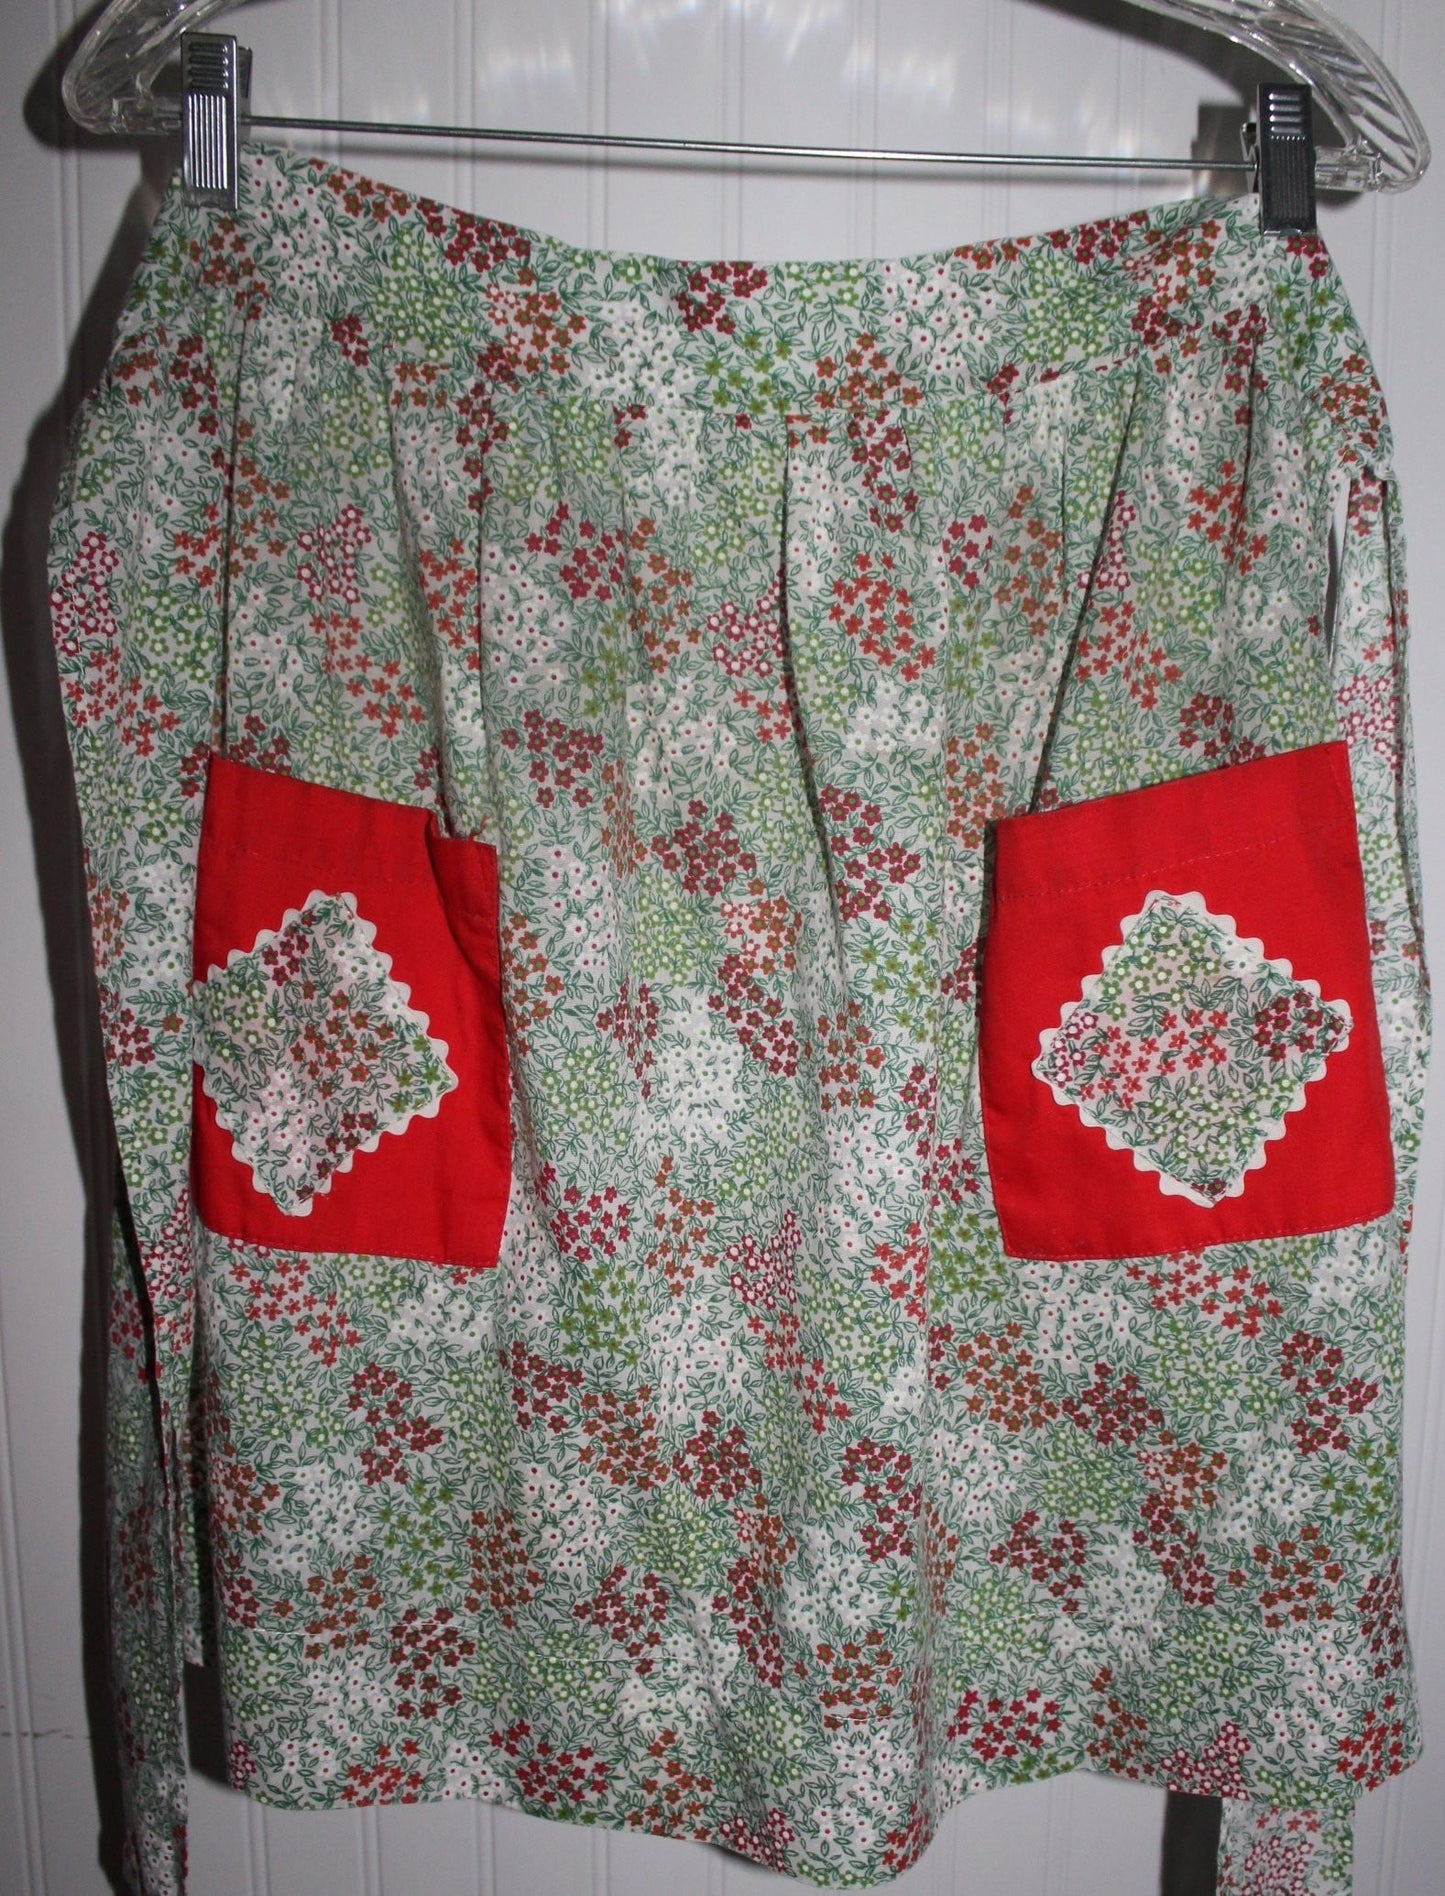 Kitchen 2 Aprons Vintage Green Print Cotton Angelica Tie Side Wear or Pattern Use pockets